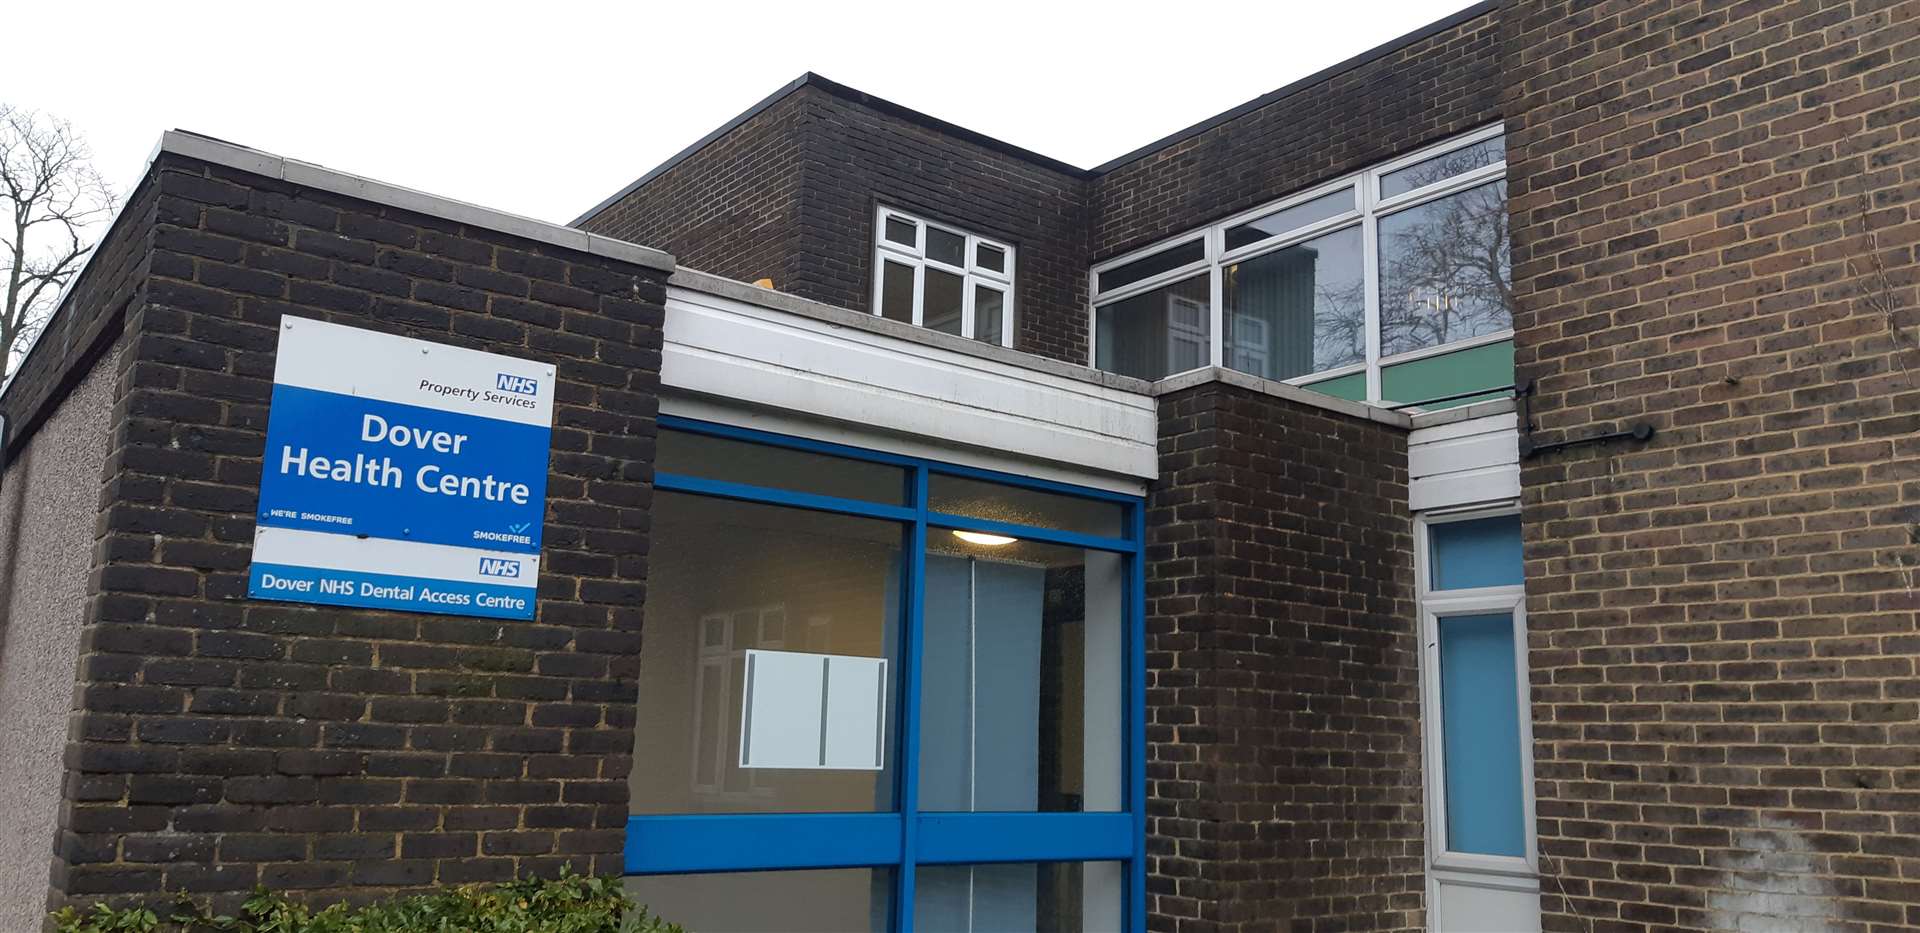 Vaccinations have taken place at Dover Health Centre